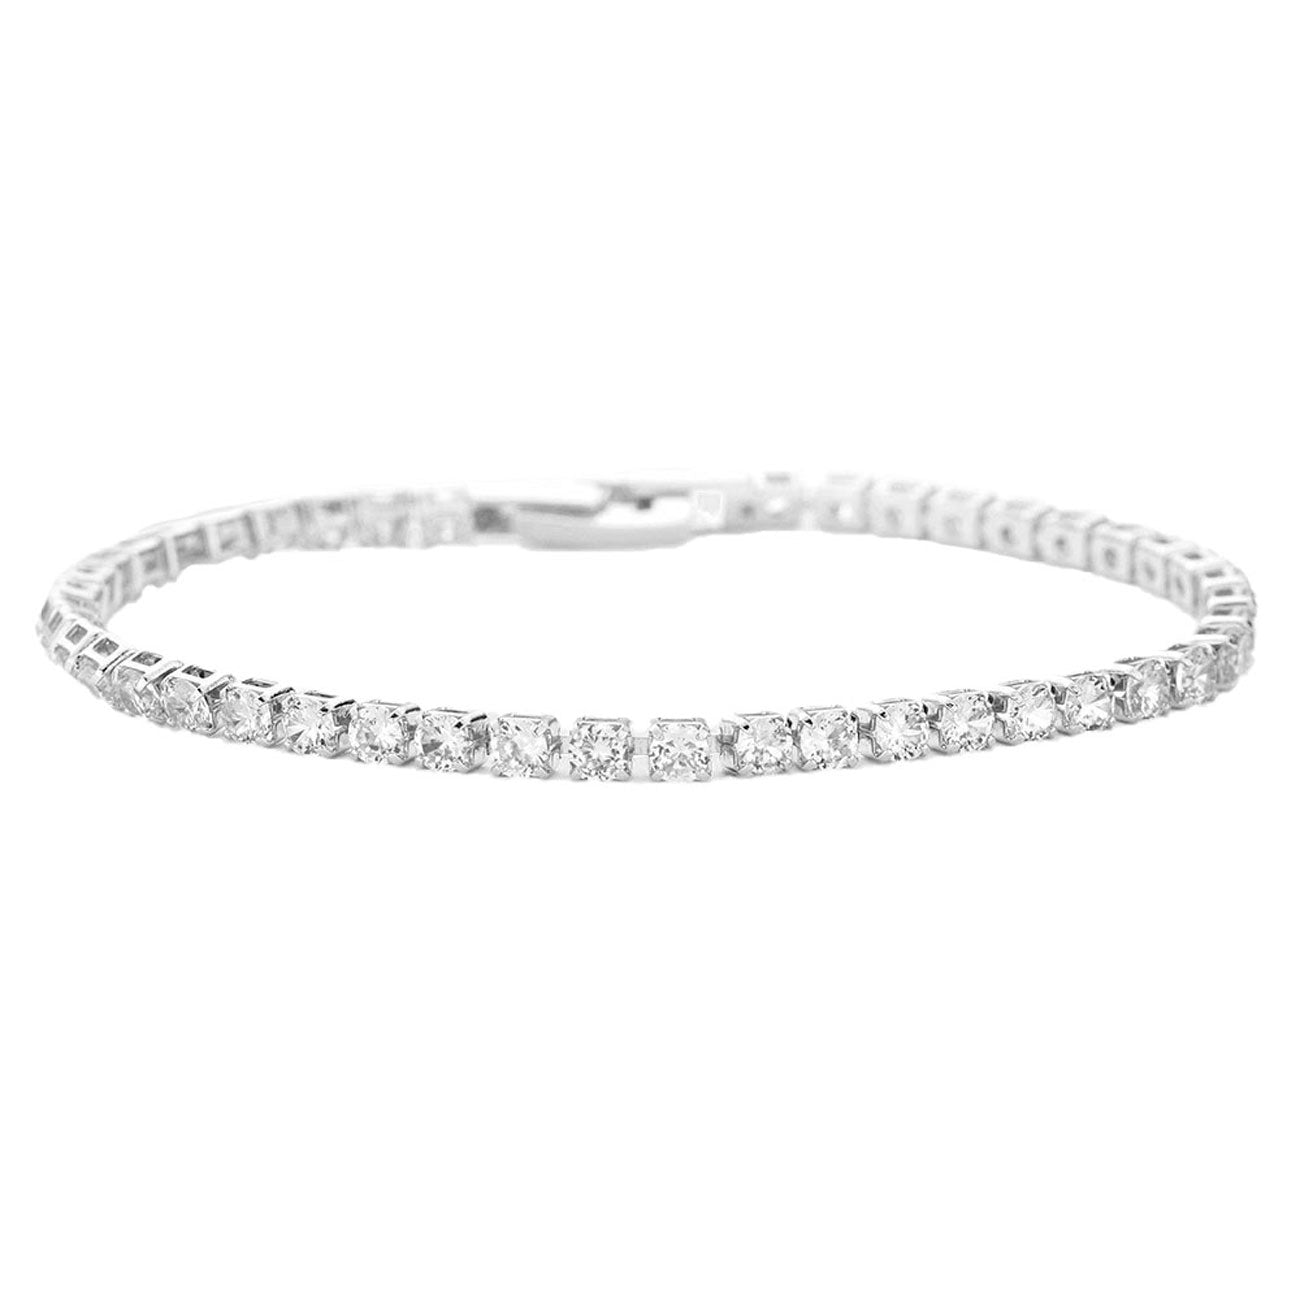 Silver Brass Metal Tennis Evening Bracelet, Get ready with these Evening Bracelet, put on a pop of color to complete your ensemble. Perfect for adding just the right amount of shimmer & shine and a touch of class to special events. Perfect Birthday Gift, Anniversary Gift, Mother's Day Gift, Graduation Gift.